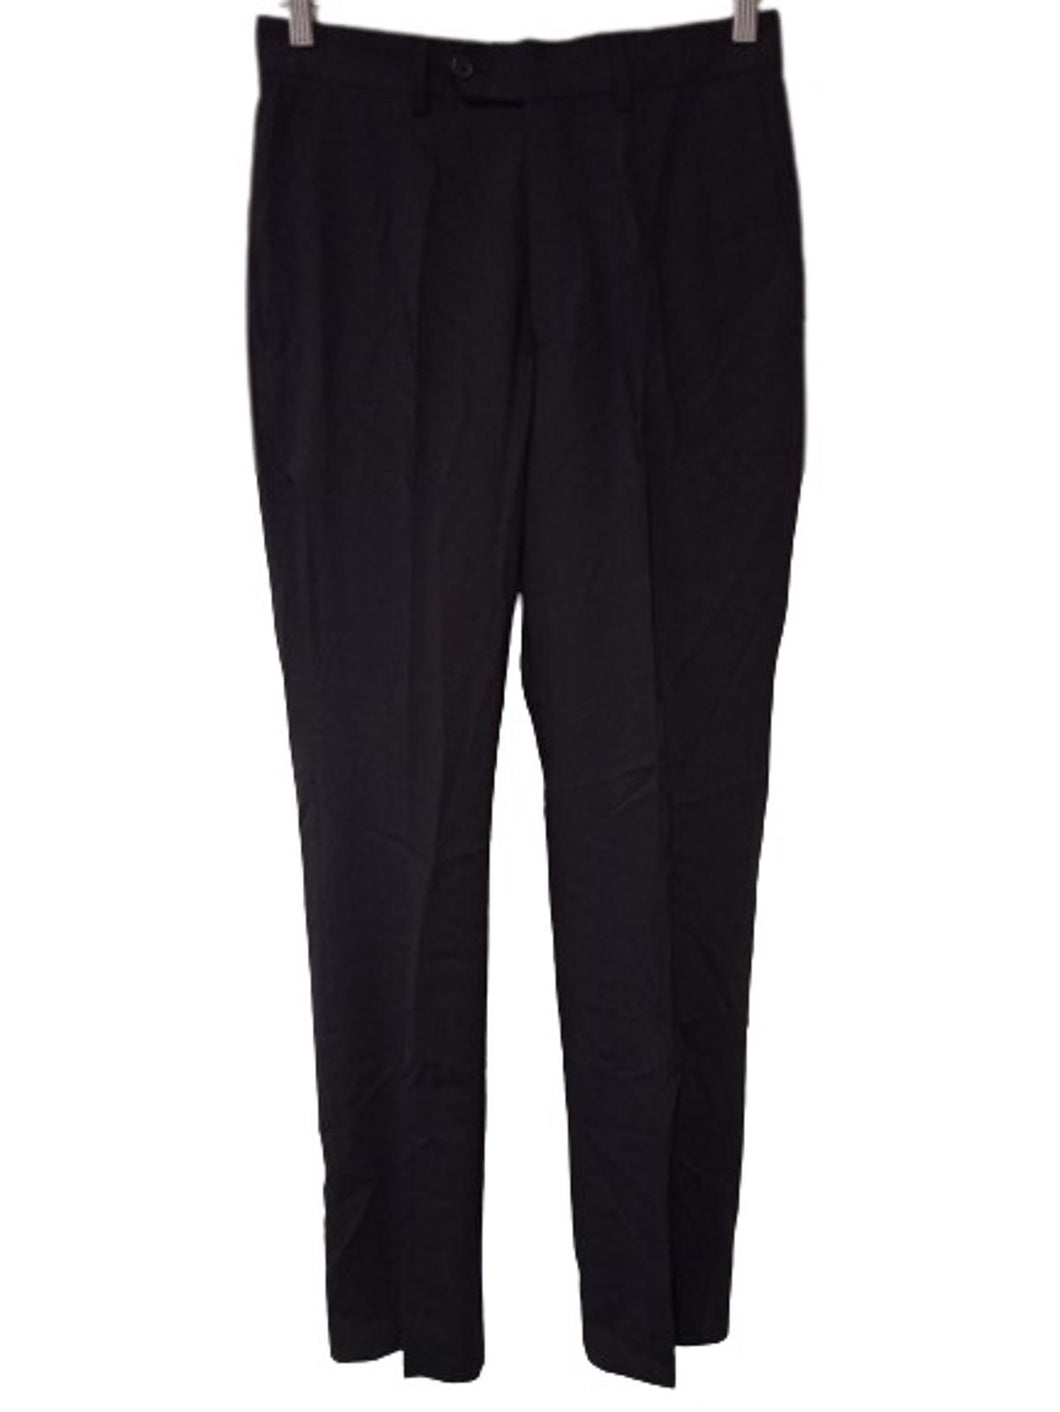 TED BAKER Men's Black Wool Accelerated High Performance Trousers Size 32S